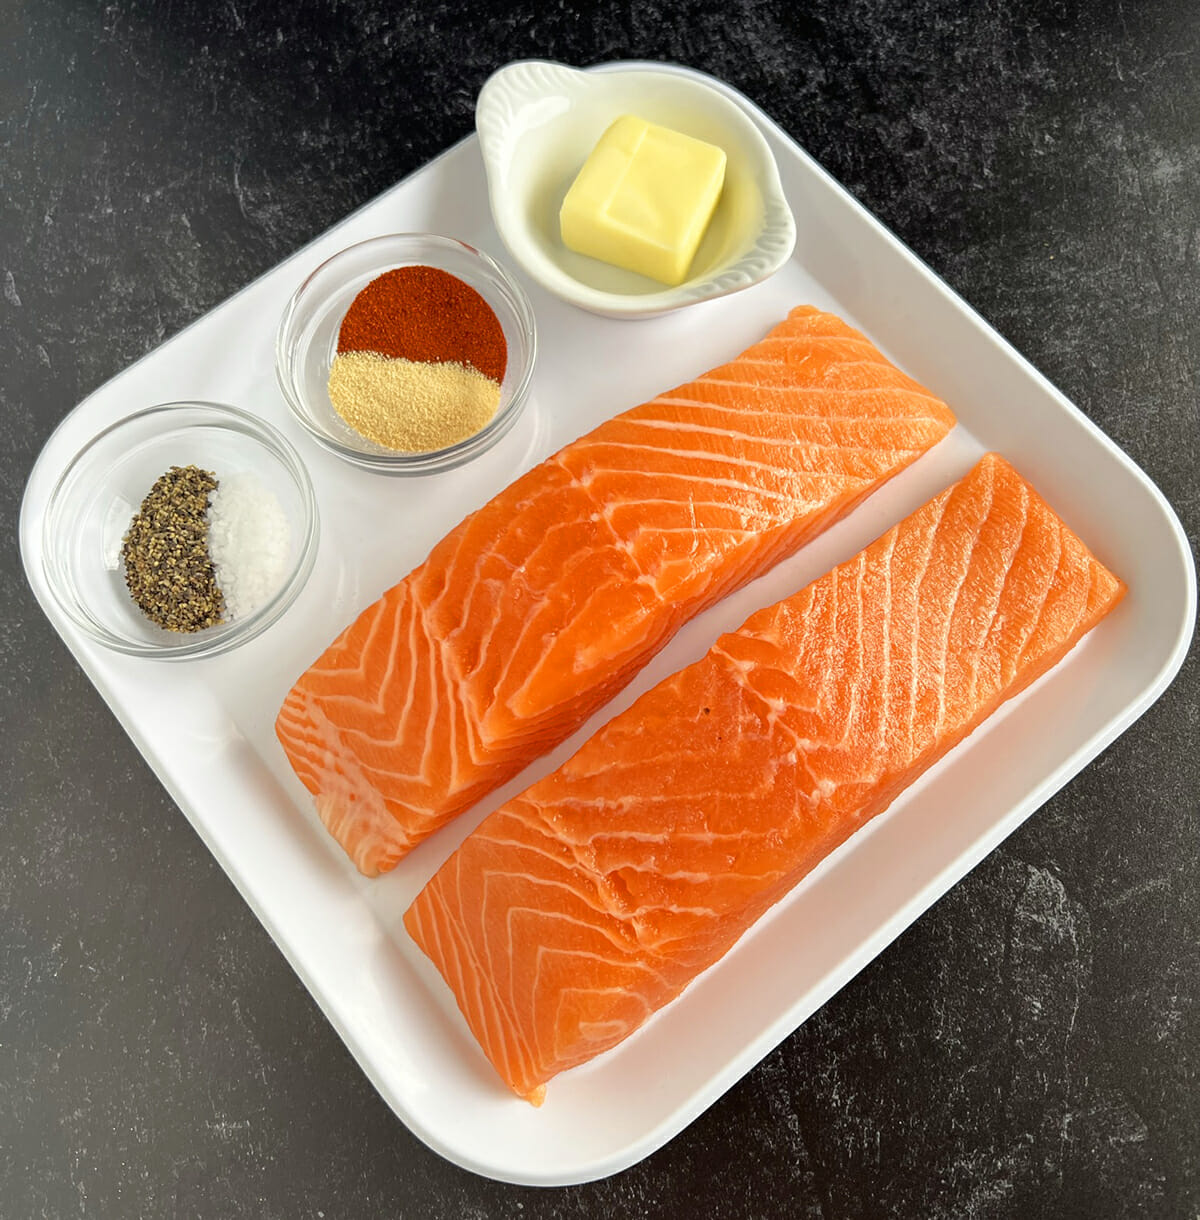 Recipe for oven baked salmon